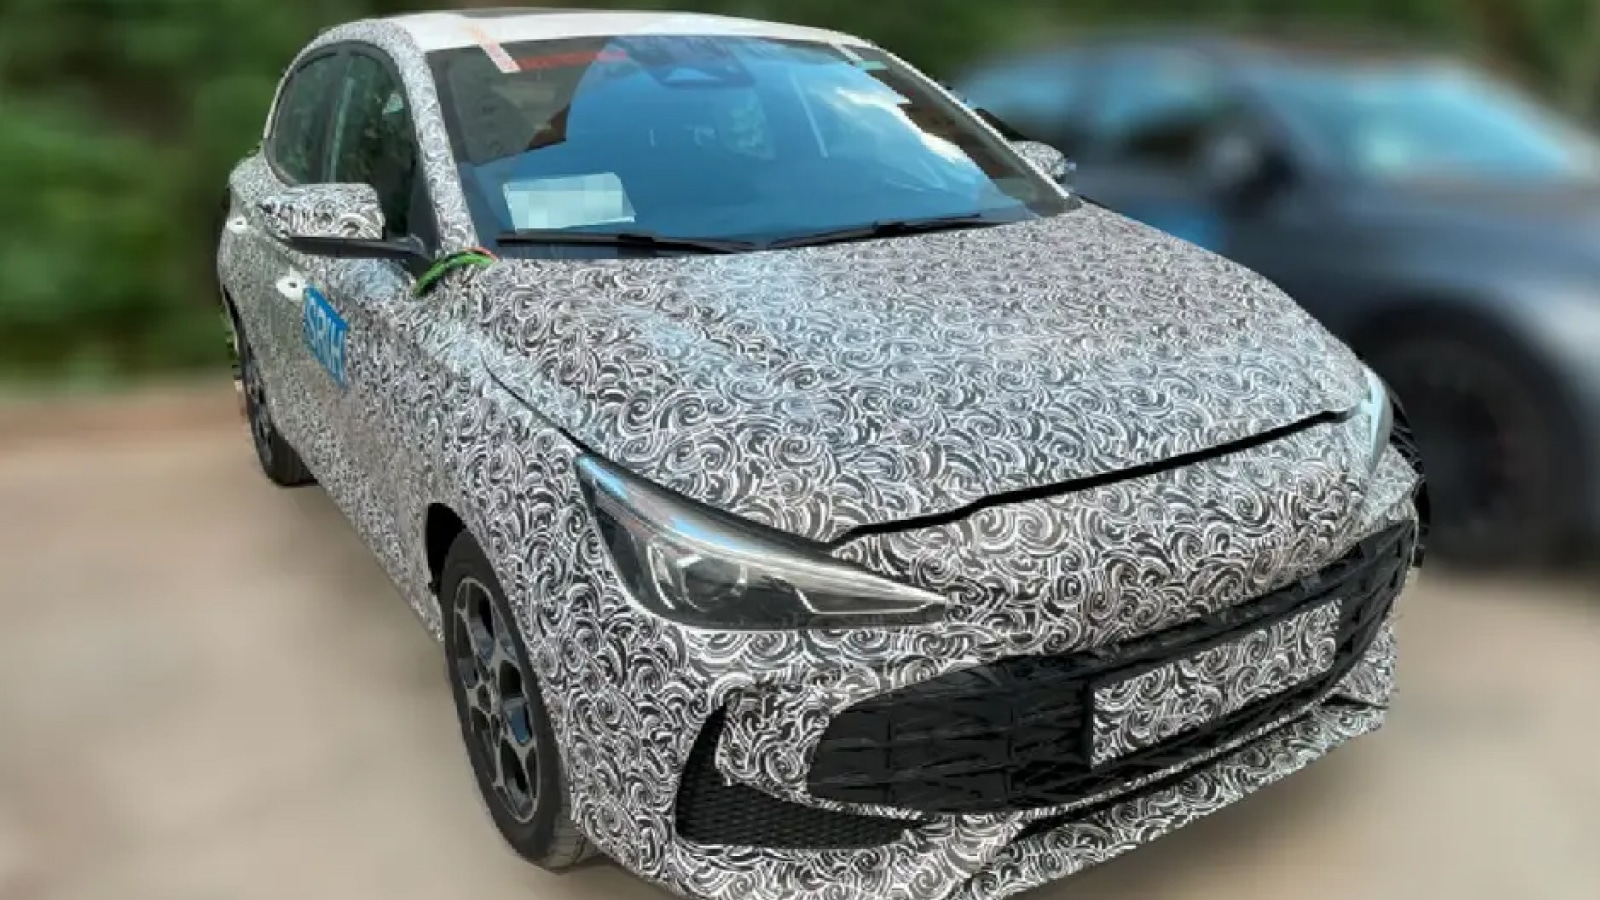 MG3 hatchback spotted in China during road tests. Coming to Australia